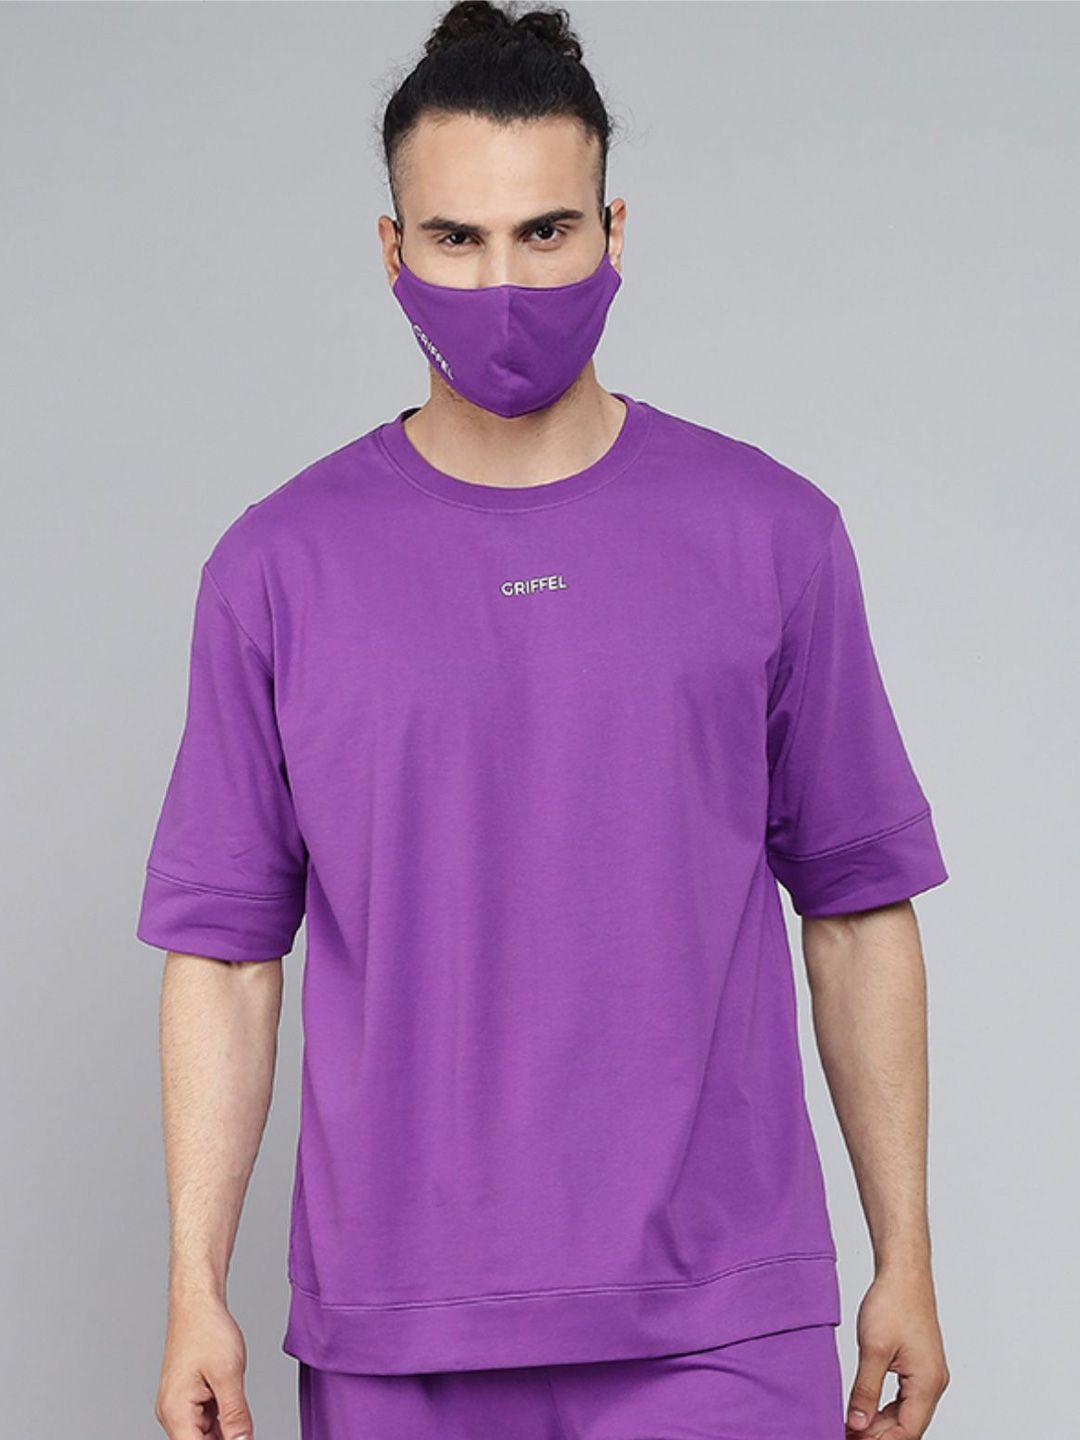 griffel men purple loose t-shirt with mask